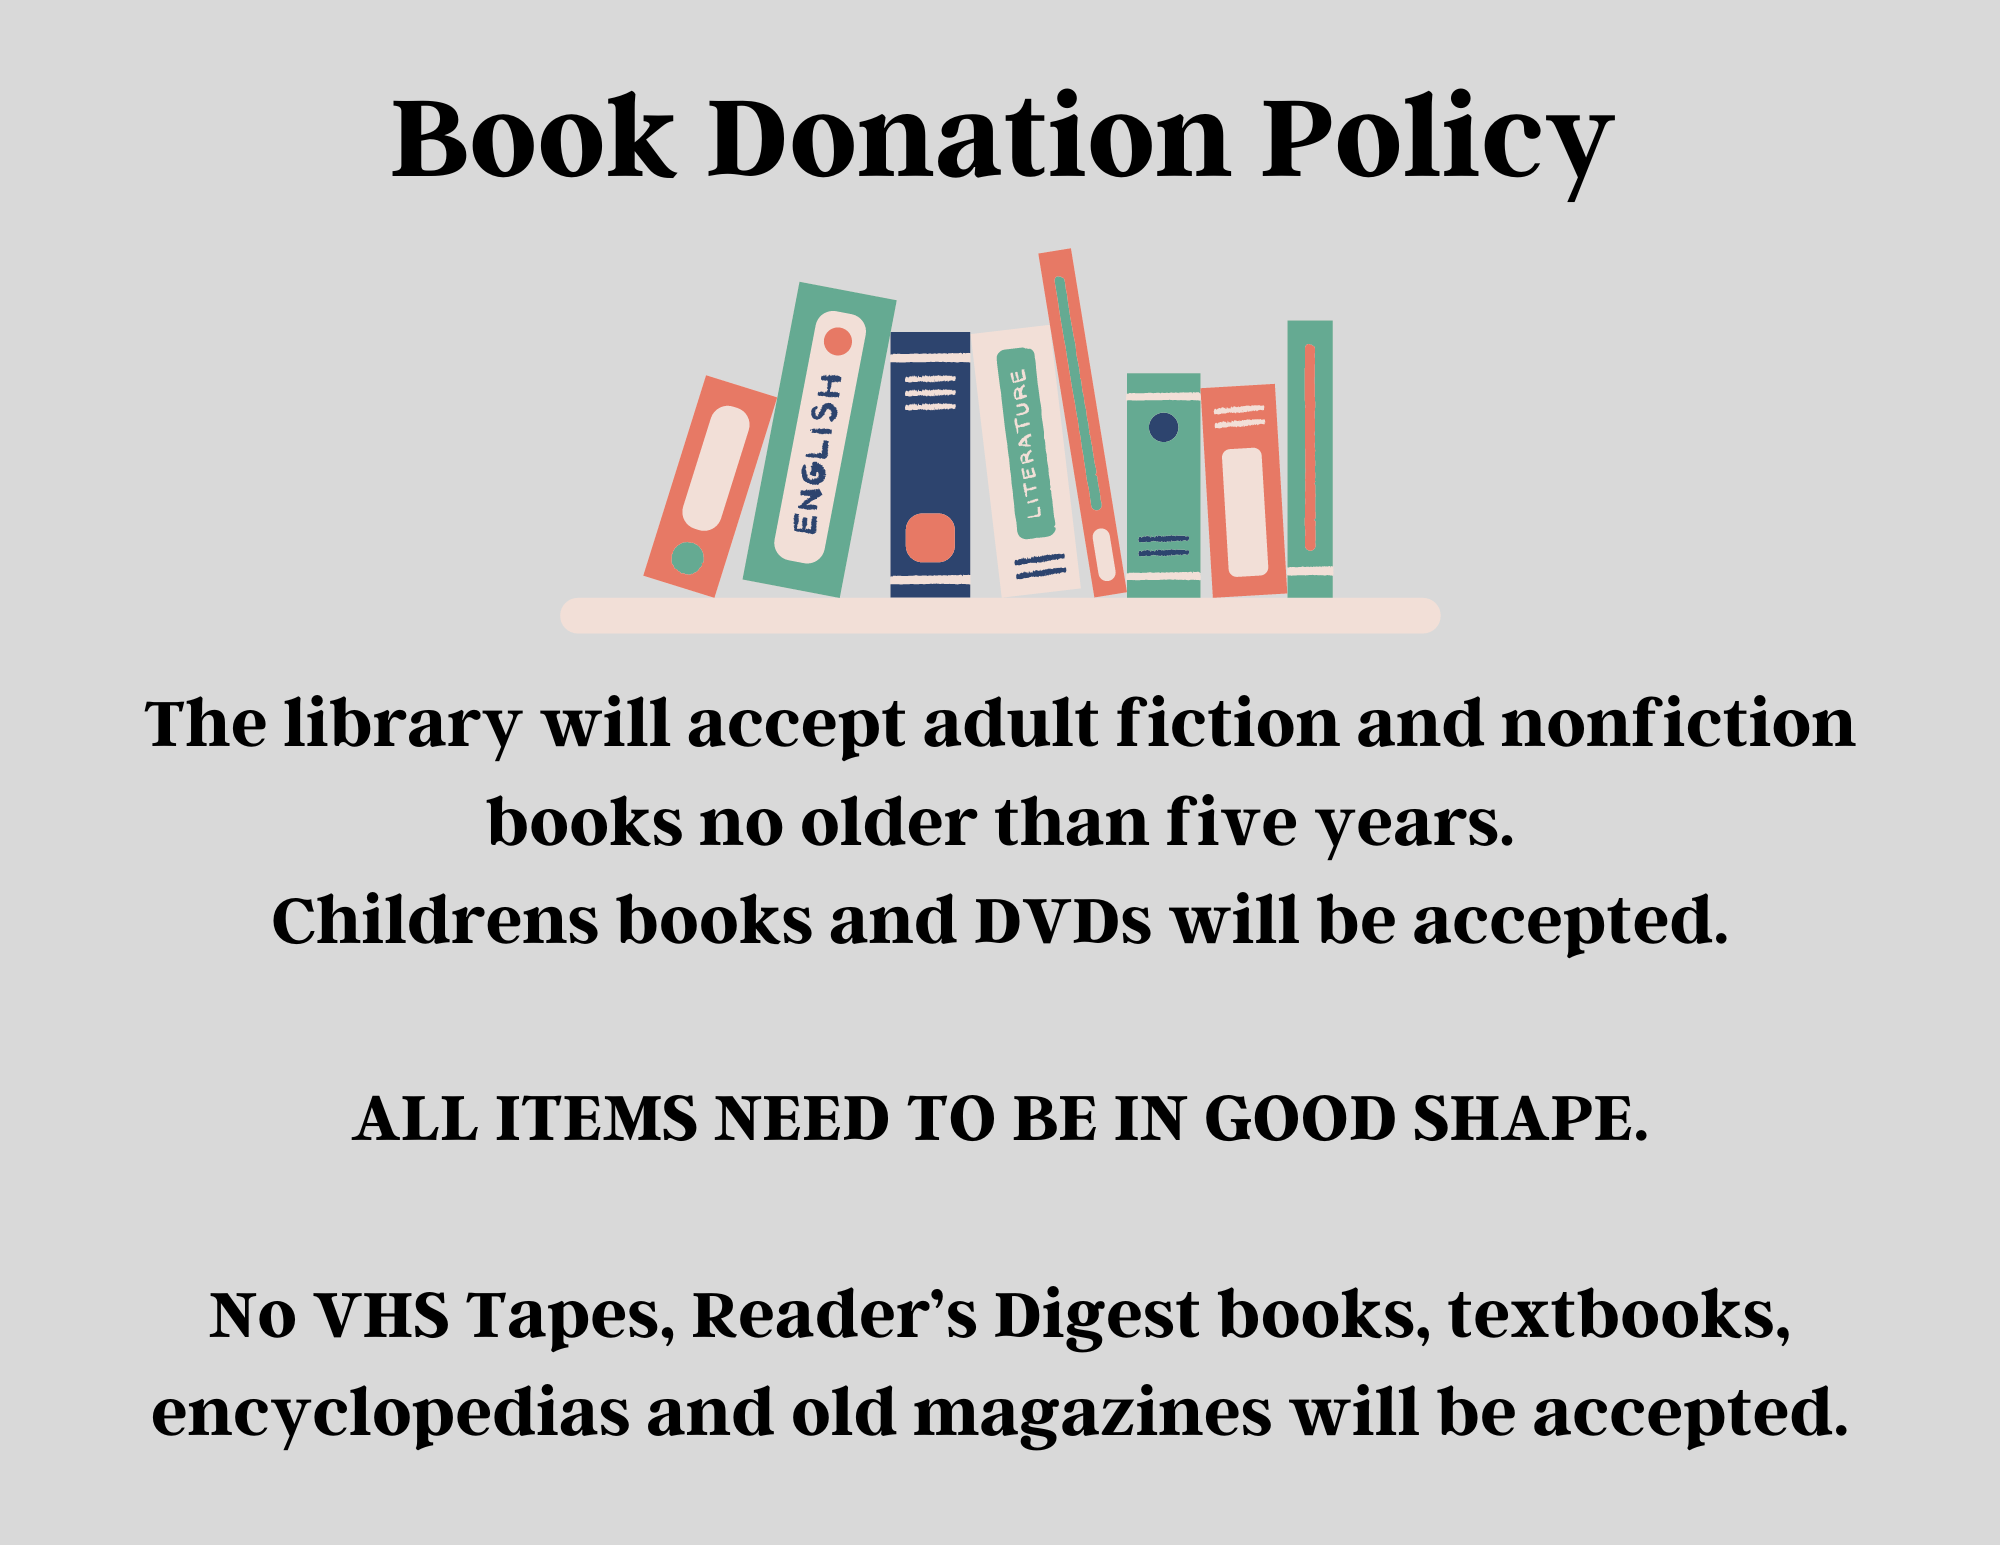 Book donation policy